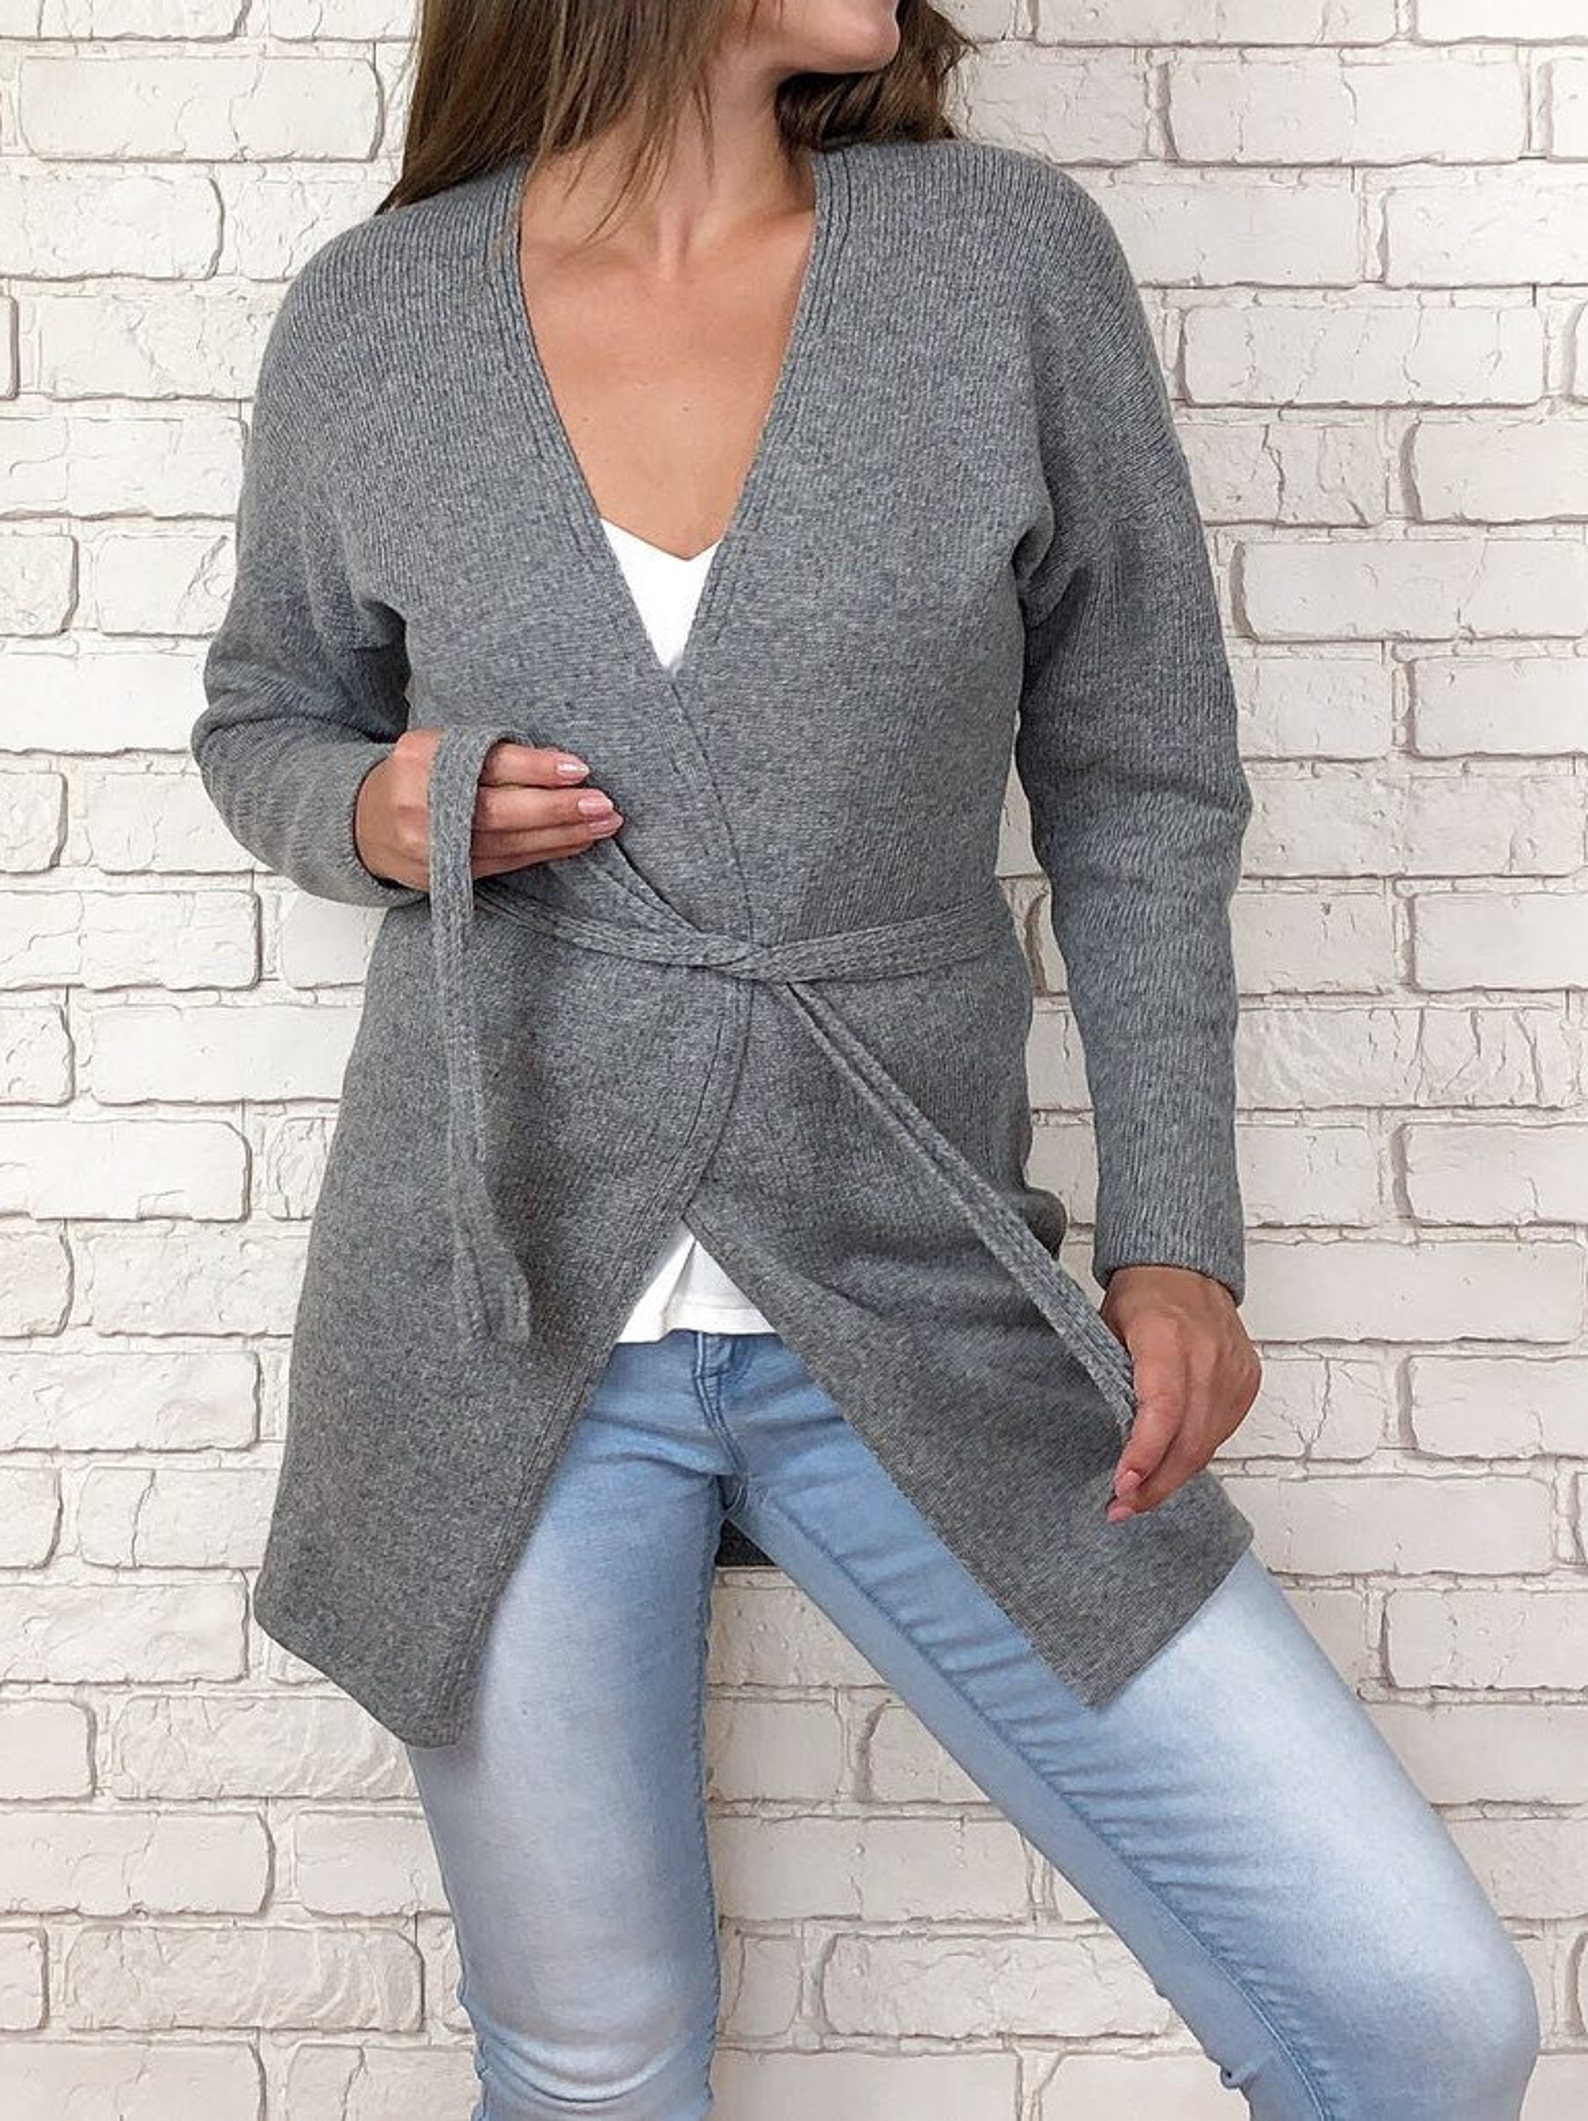 Gray Wool Cardigan in size S with long sleeves and belt Hand | Etsy